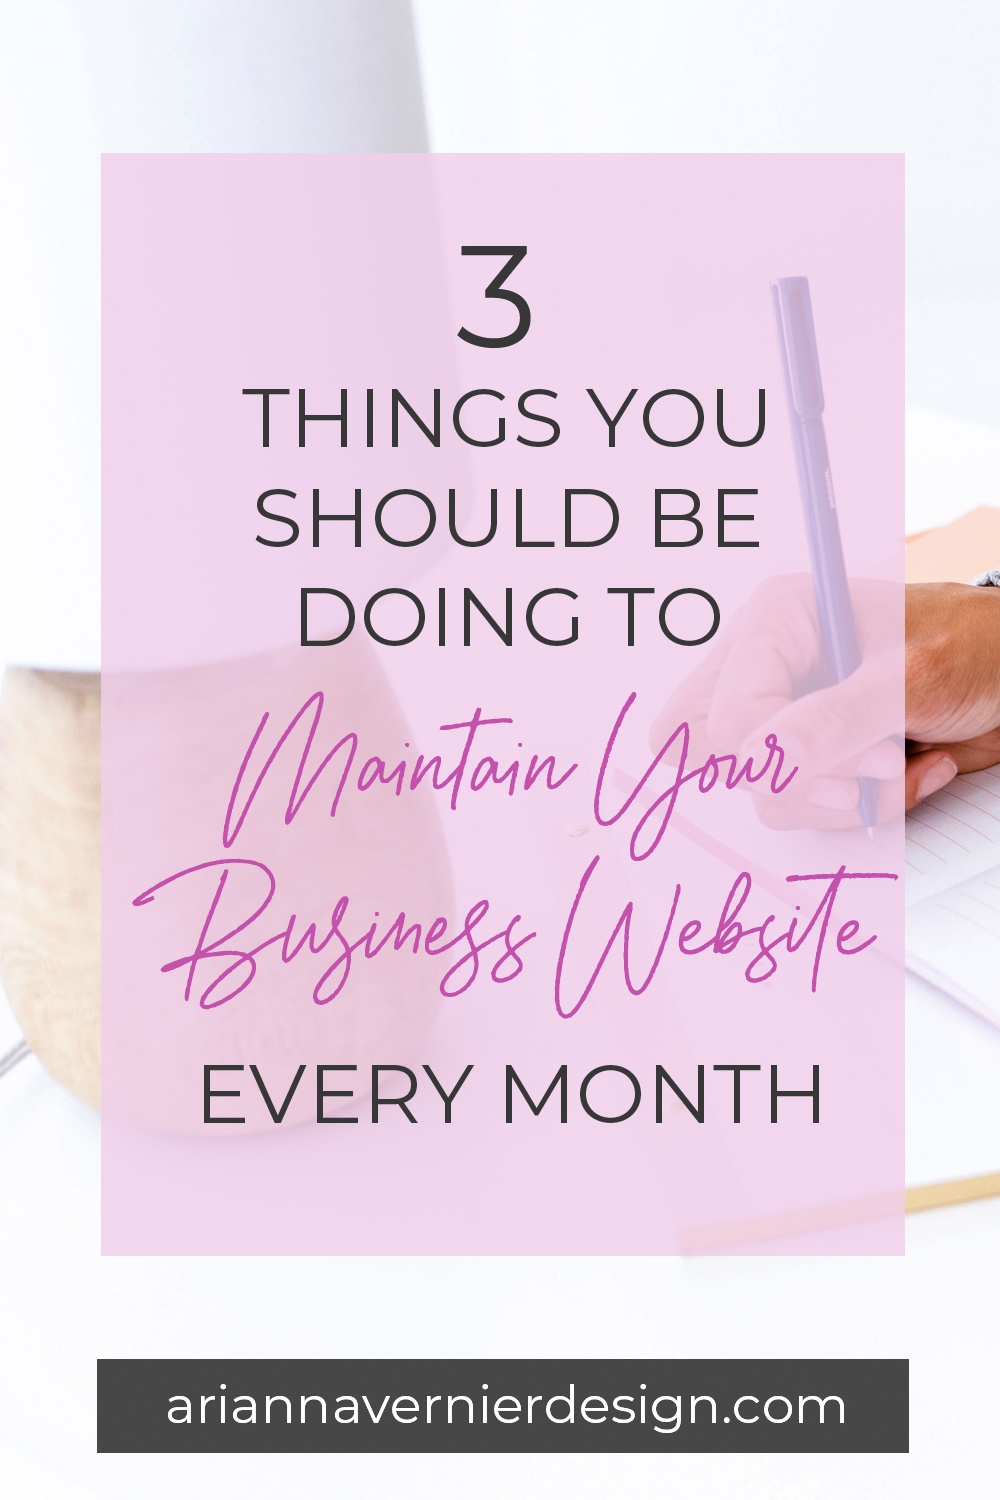 Pinterest pin with a desktop and woman writing in the background, with a light purple rectangle over top, and the title "3 Things You Should be Doing to Maintain Your Business Website Every Month"